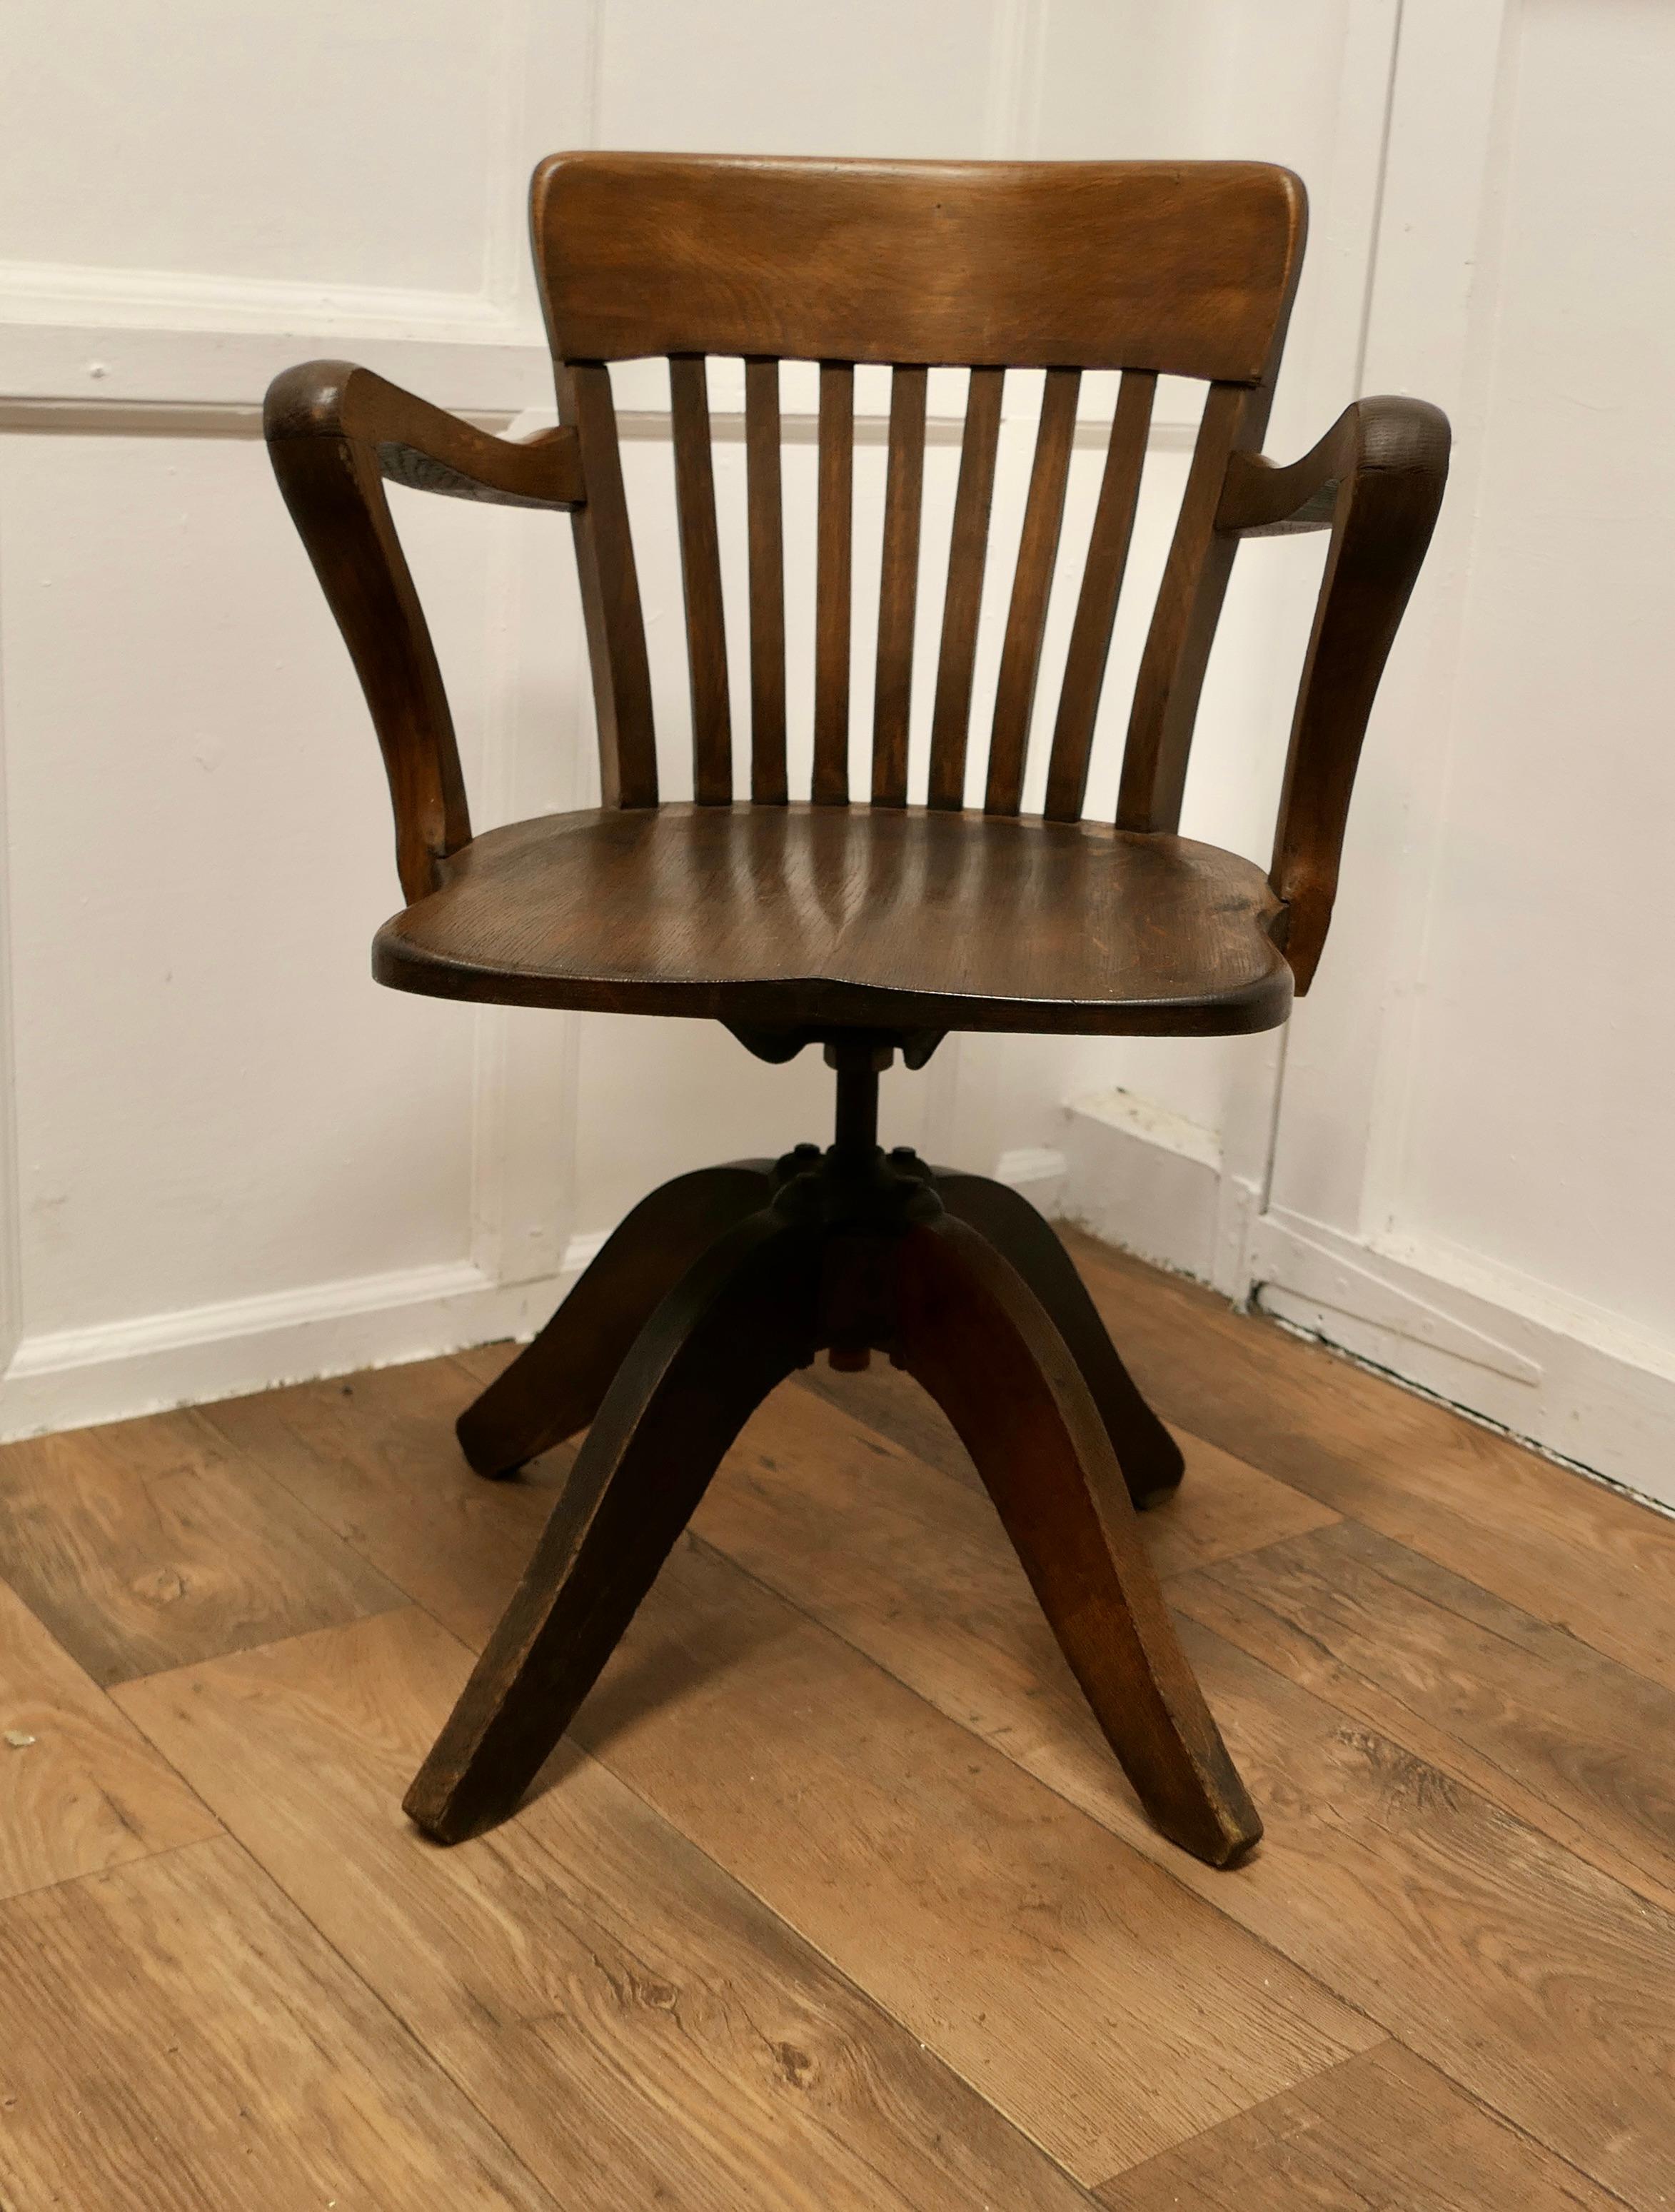 A 19th Century Swivelling Oak Office Chair or Desk Chair  

The Chair has an attractive deep curving back top rail with slats and arching Shepherds Crook Arm Rests. The Chair has a sculptured seat and revolves, also the height can be adjusted from